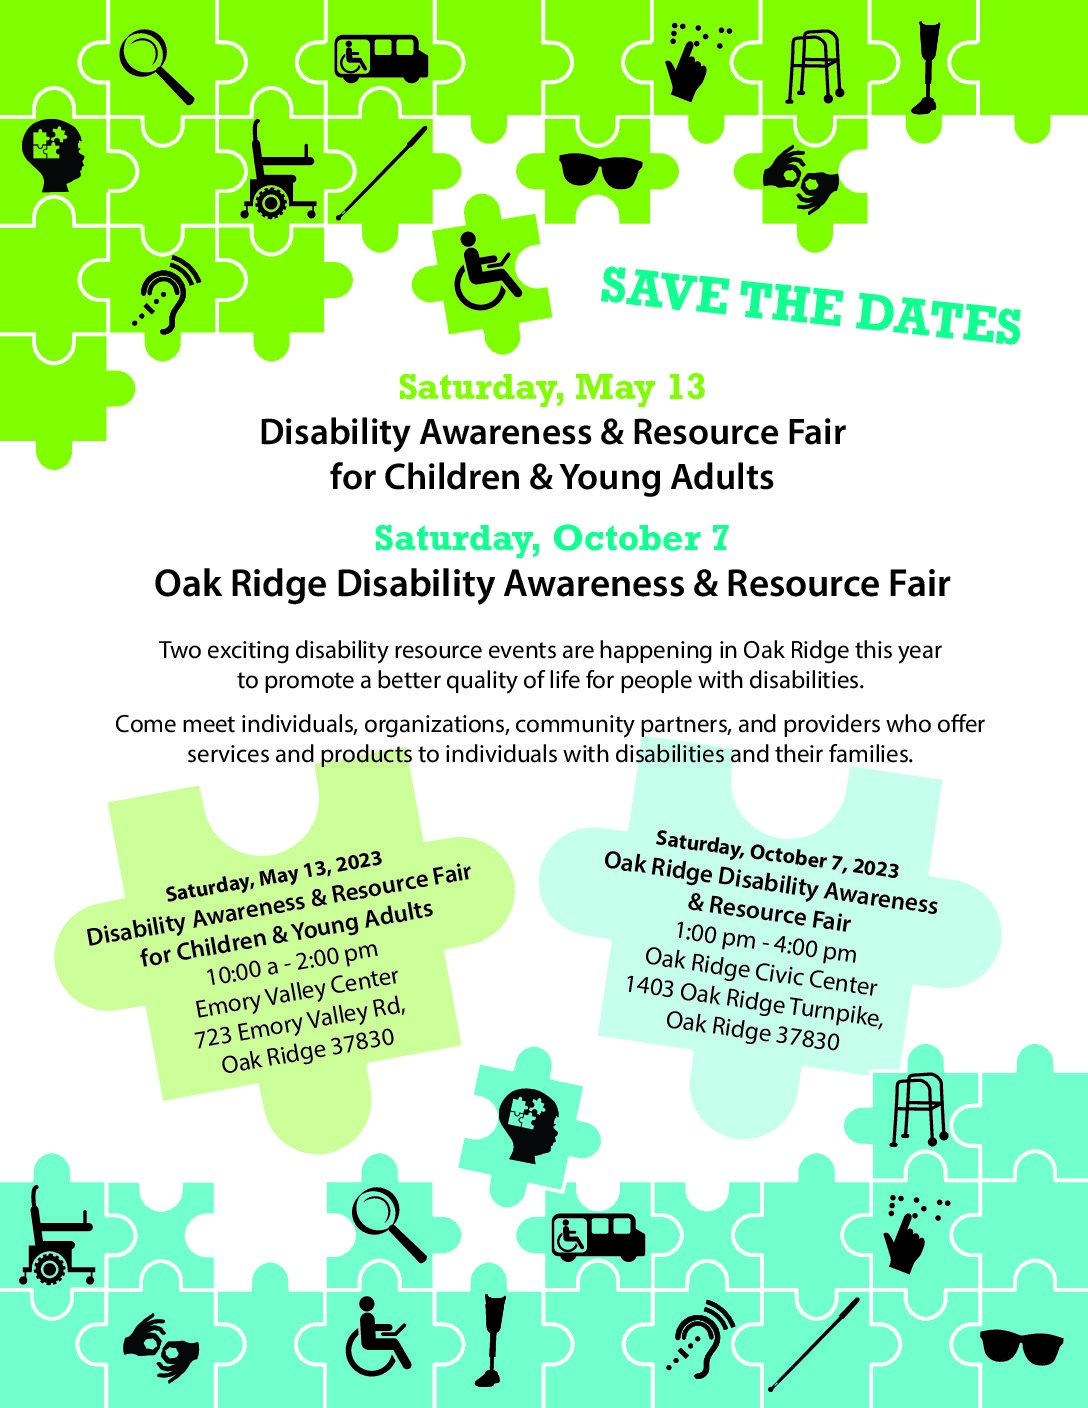 Disability Awareness & Resource Fair for Children & Young Adults